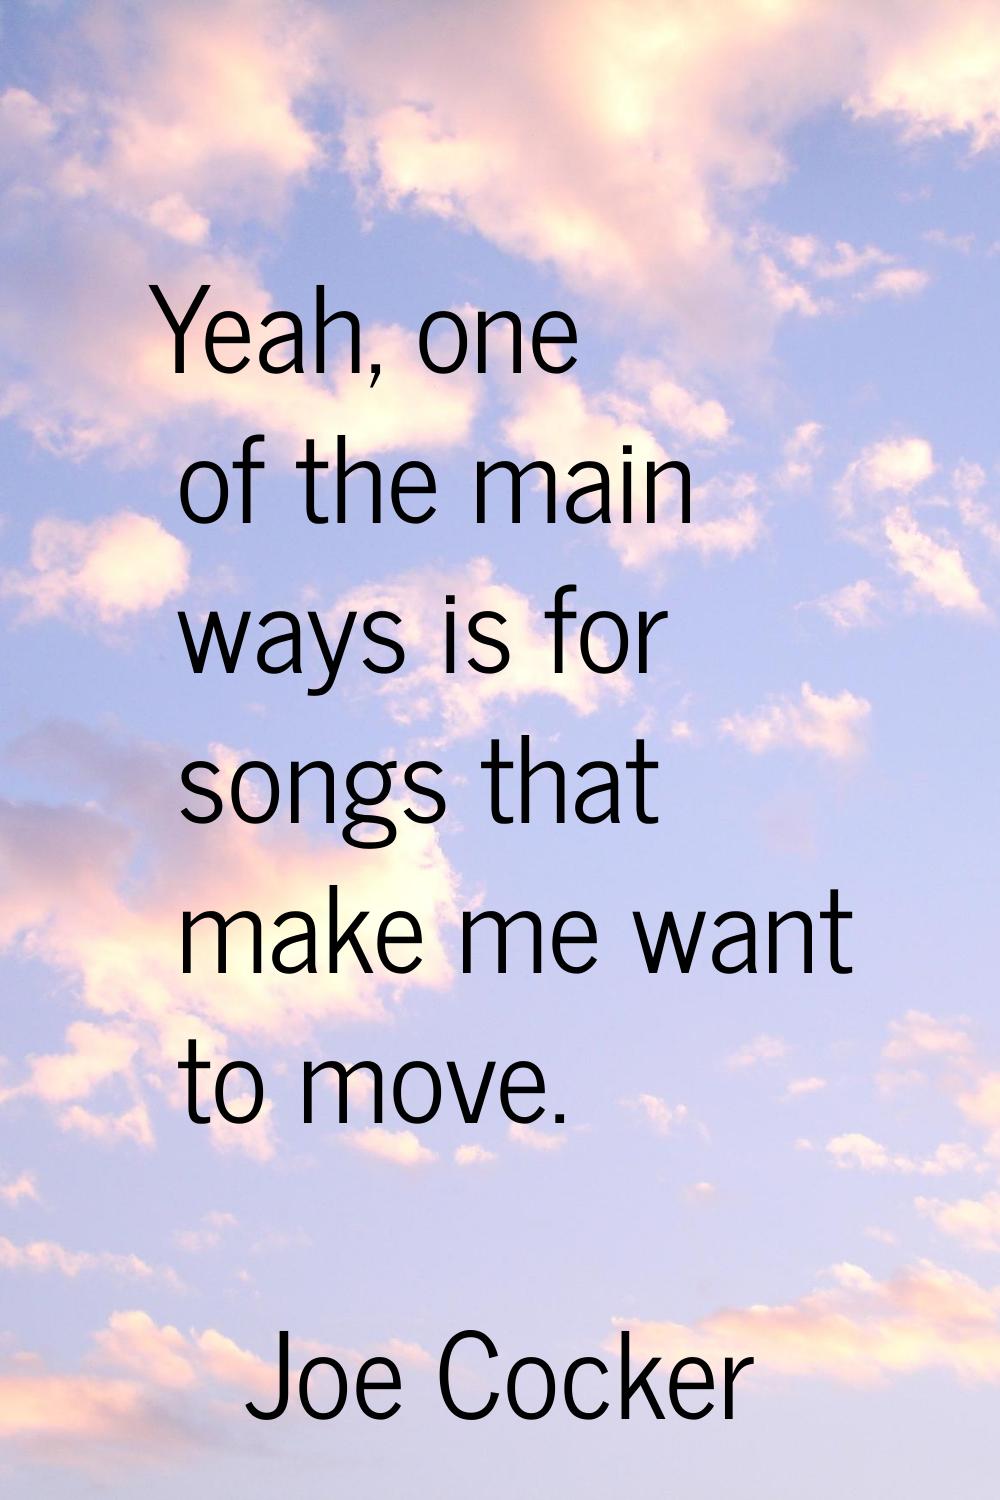 Yeah, one of the main ways is for songs that make me want to move.